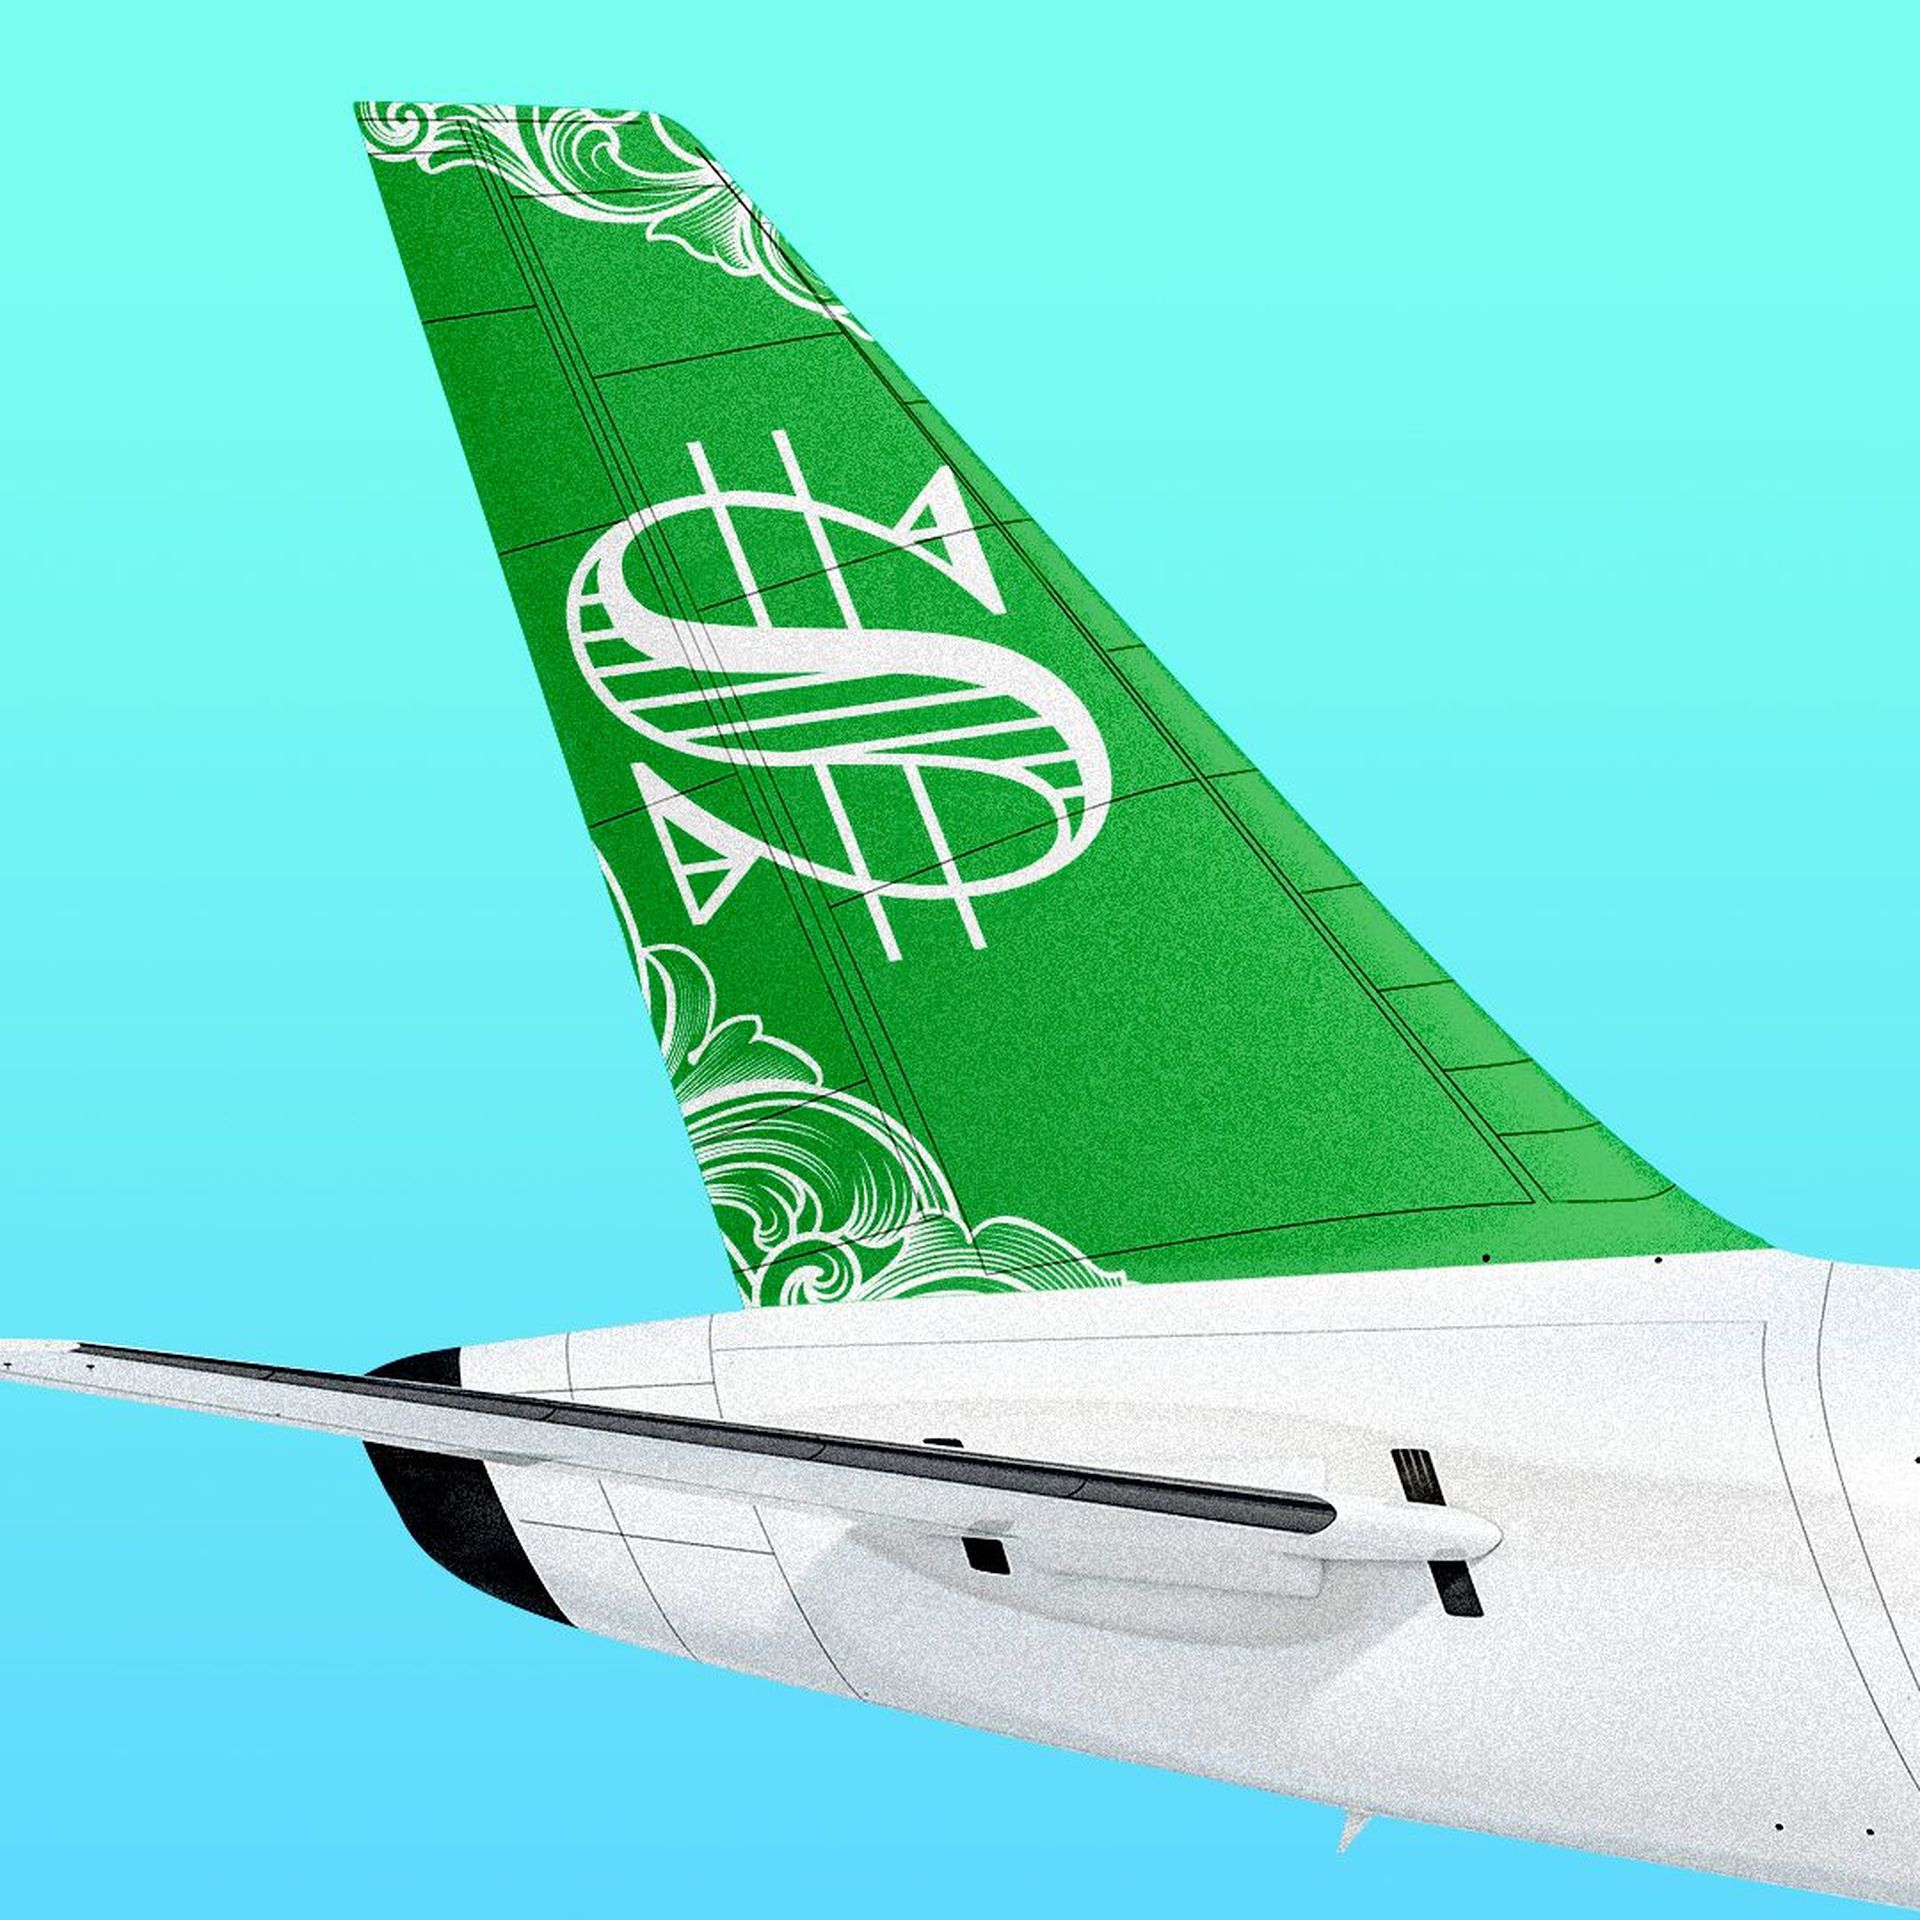 Illustration of an airplane tail design with a dollar bill sign on it.   